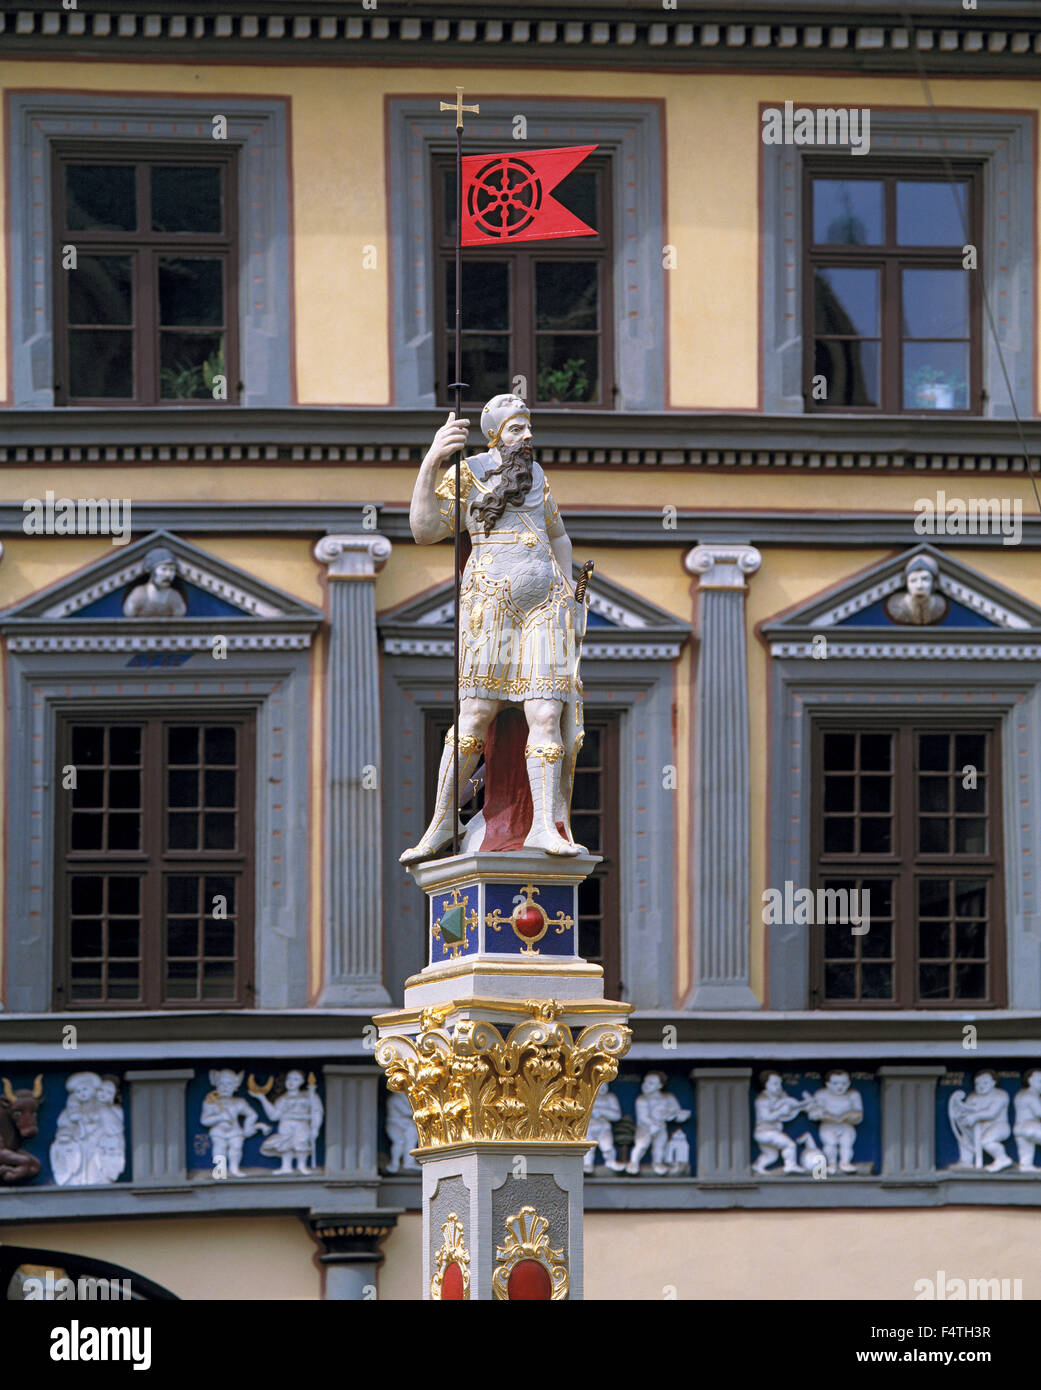 Germany, Europe, Thuringia, Erfurt, statue, Israel of Milla, house, home, red oxen, fish market, restaurant Stock Photo